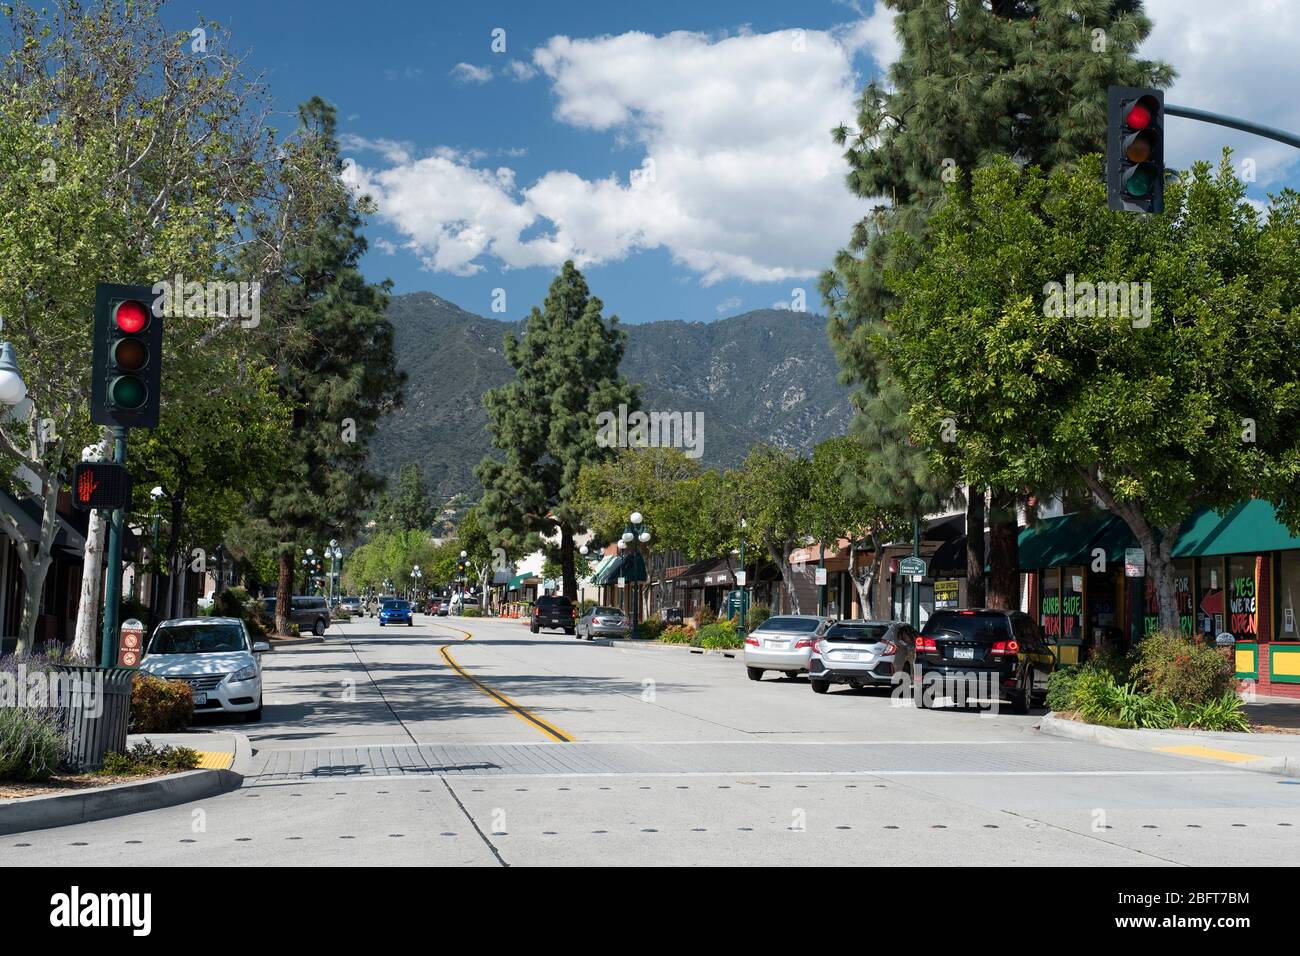 View of Myrtle avenue shopping district in downtown Monrovia, California with the San Gabriel Mountains as a scenic backdrop Stock Photo